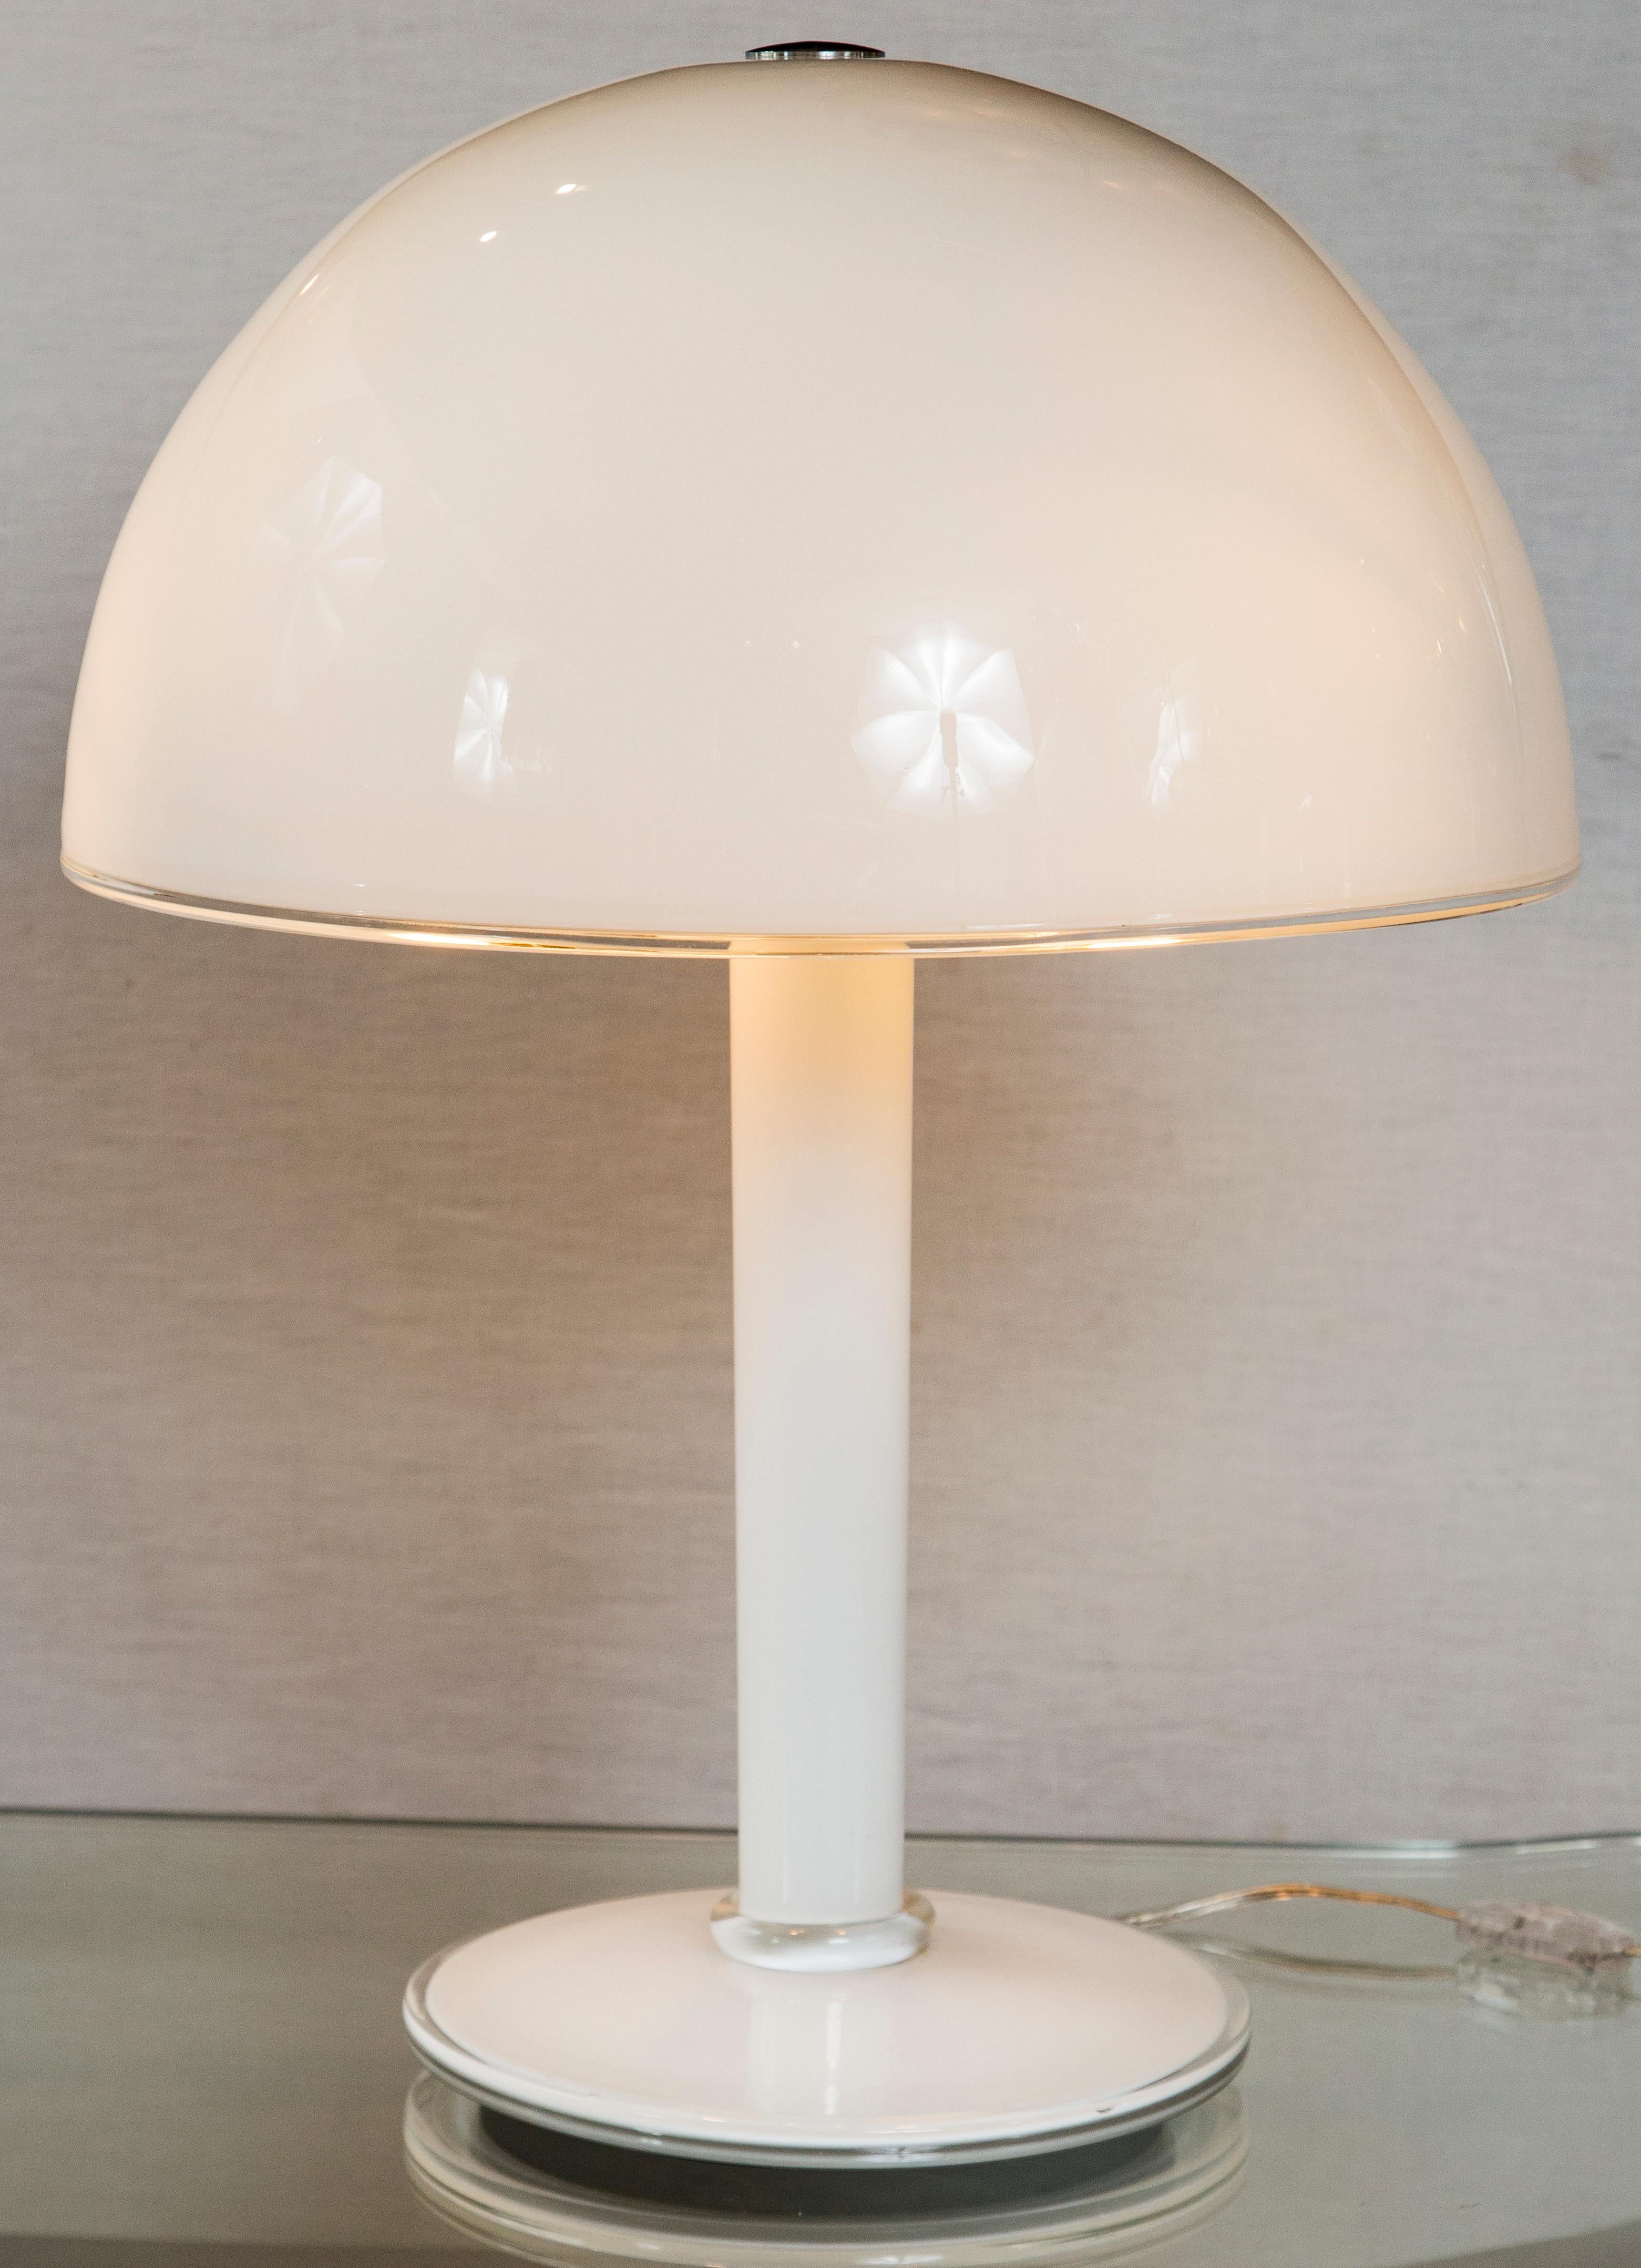 Lovely proportioned dome-shaped table lamp in an white and clear blown glass with nickel fittings, rewired.
Dating: late 1970s-early 1980s
Origin: Murano, Italy
Condition: Excellent
Dimensions:
24